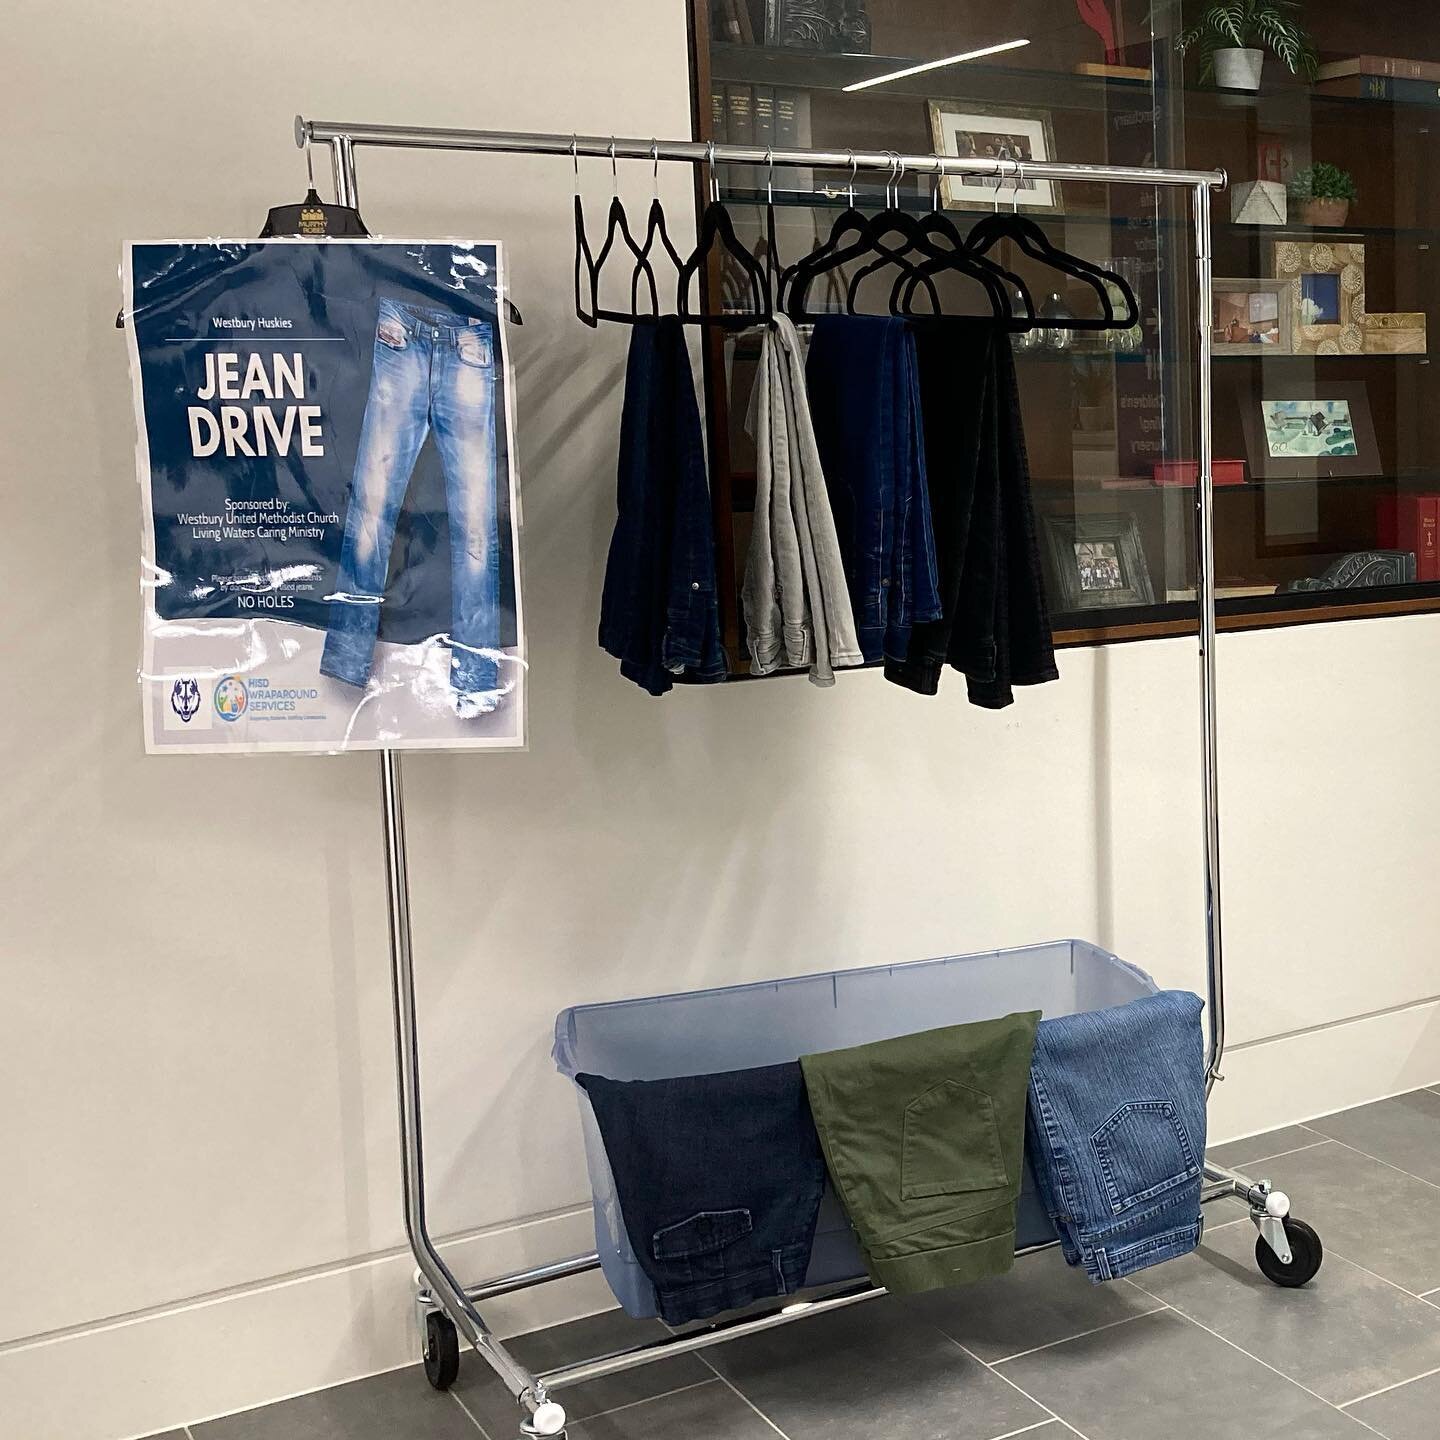 JEAN DRIVE STARTS TOMORROW!!
Bring your new and gently worn jeans, without rips or tears, for Westbury High School students from March 24- April 30. 

Help our students finish the year strong with jeans and khakis that meet school dress code requirem